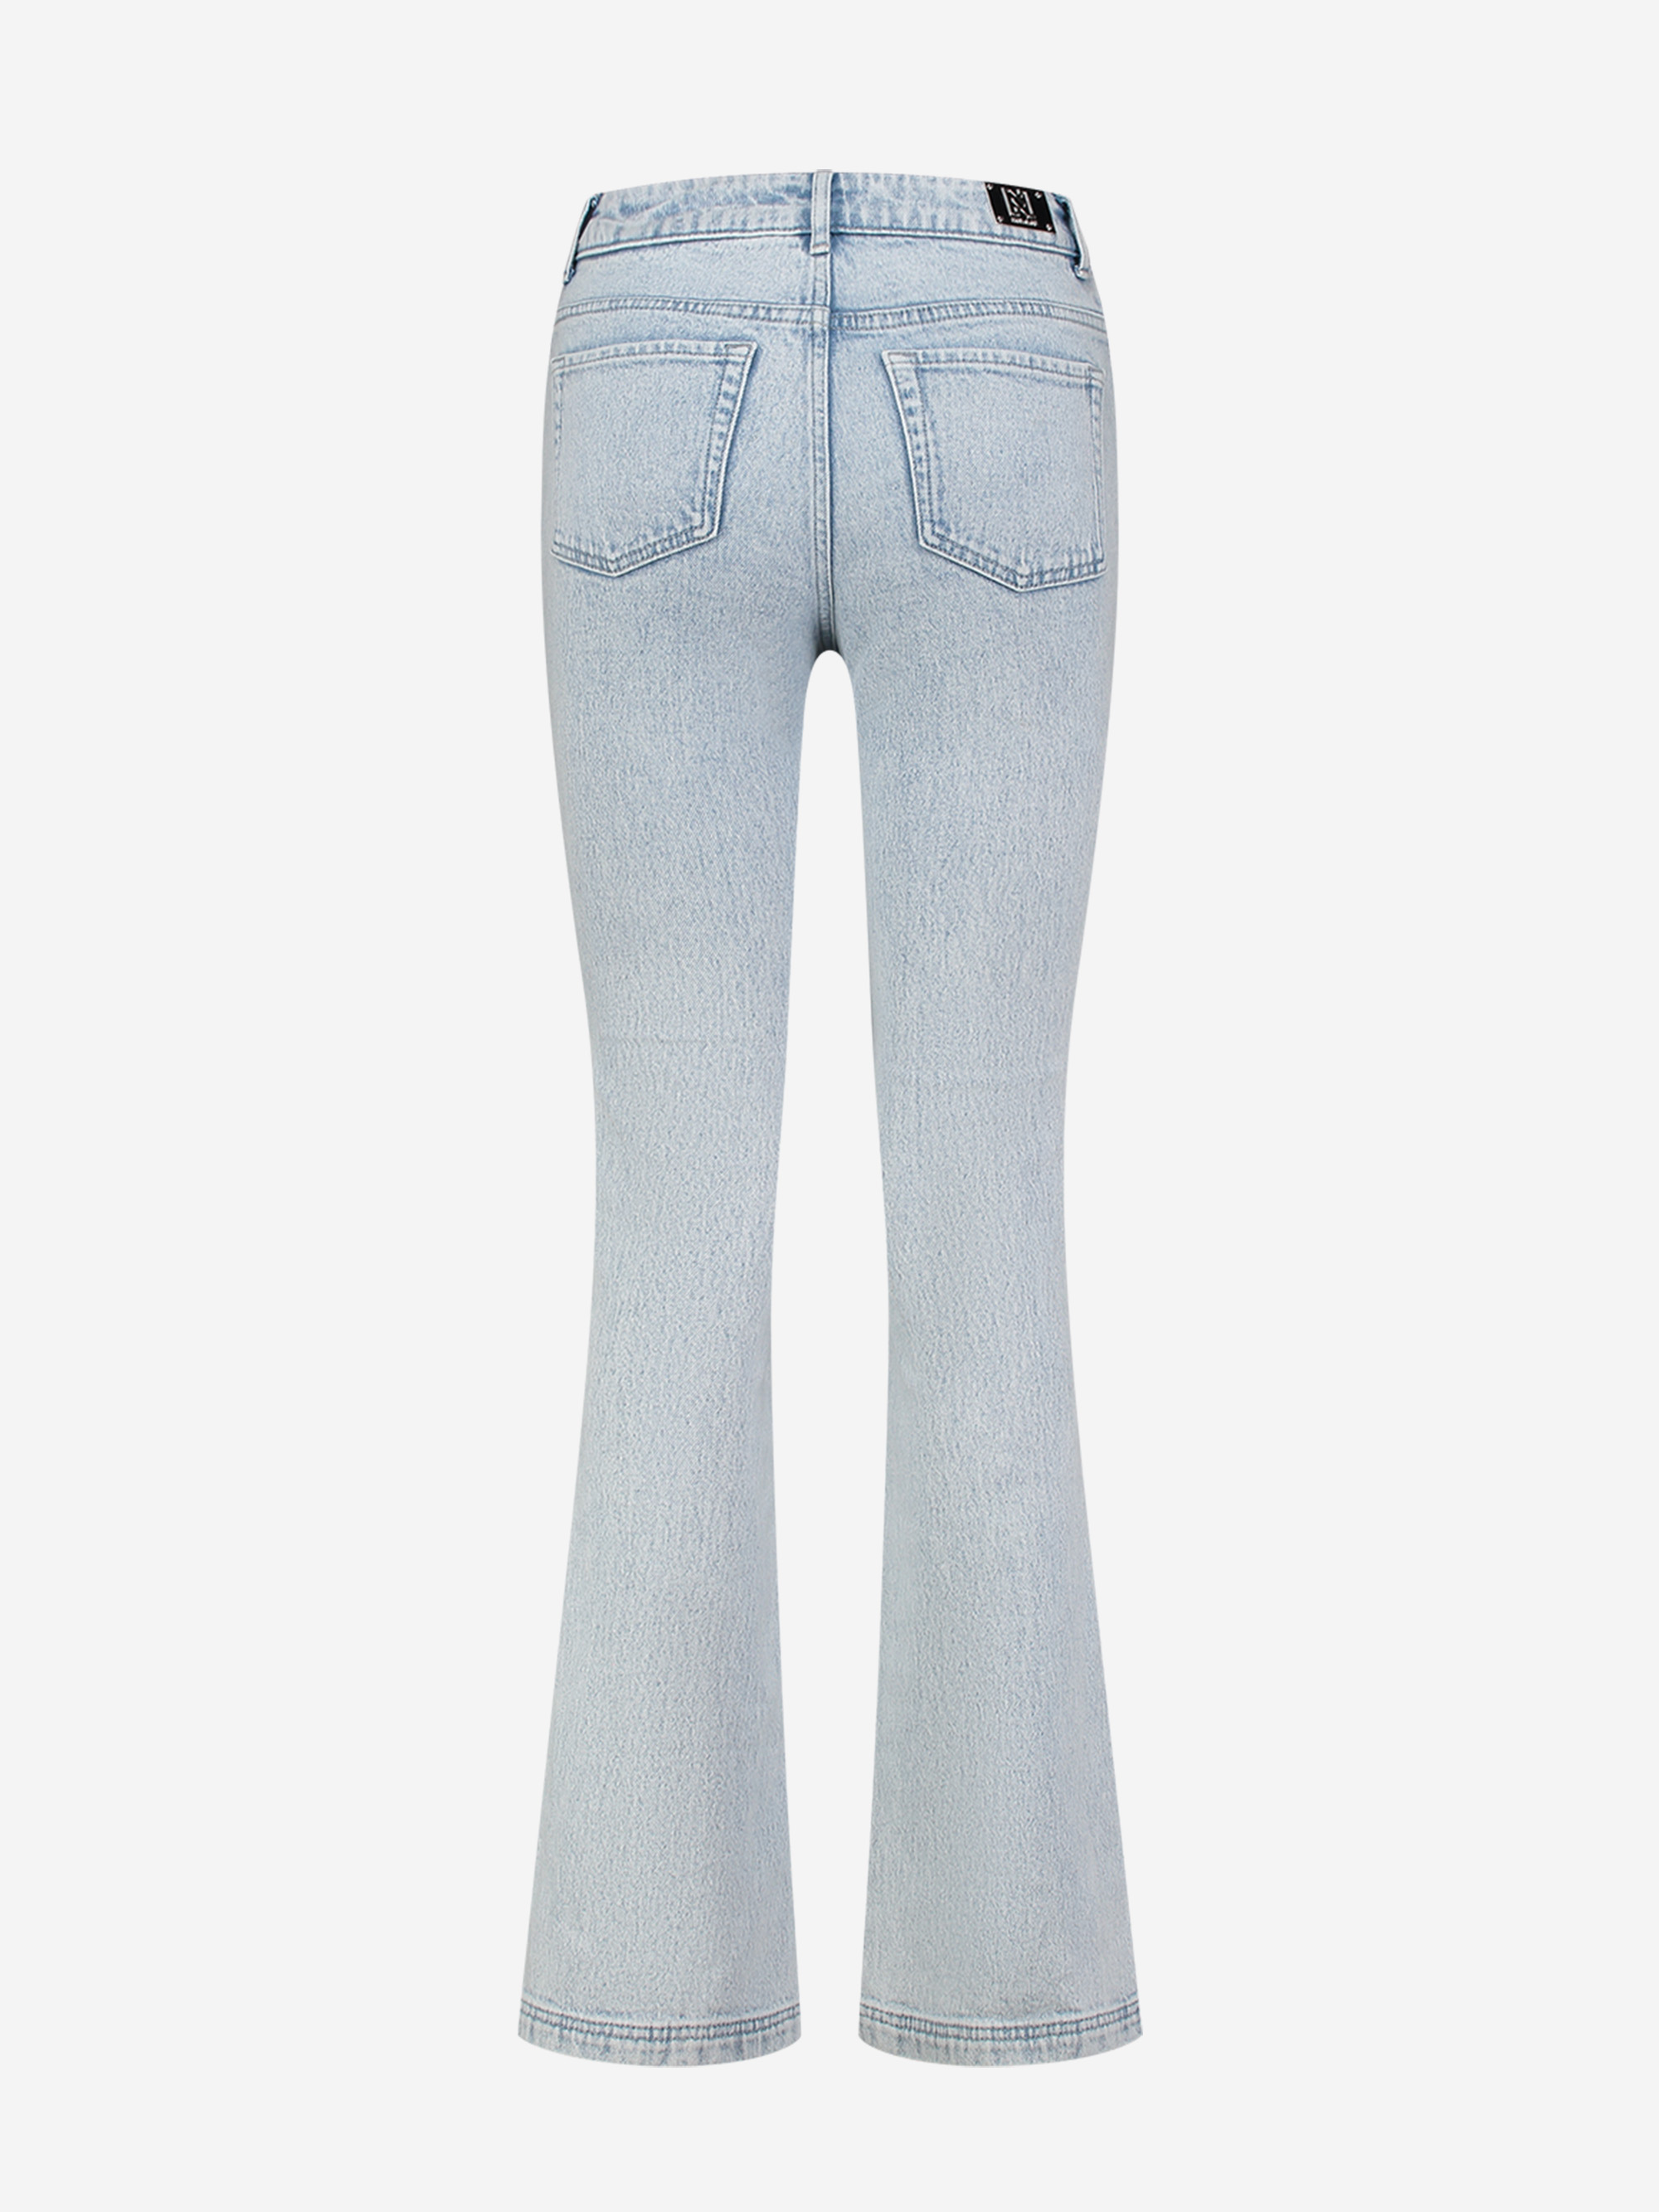 Brentwood Jeans